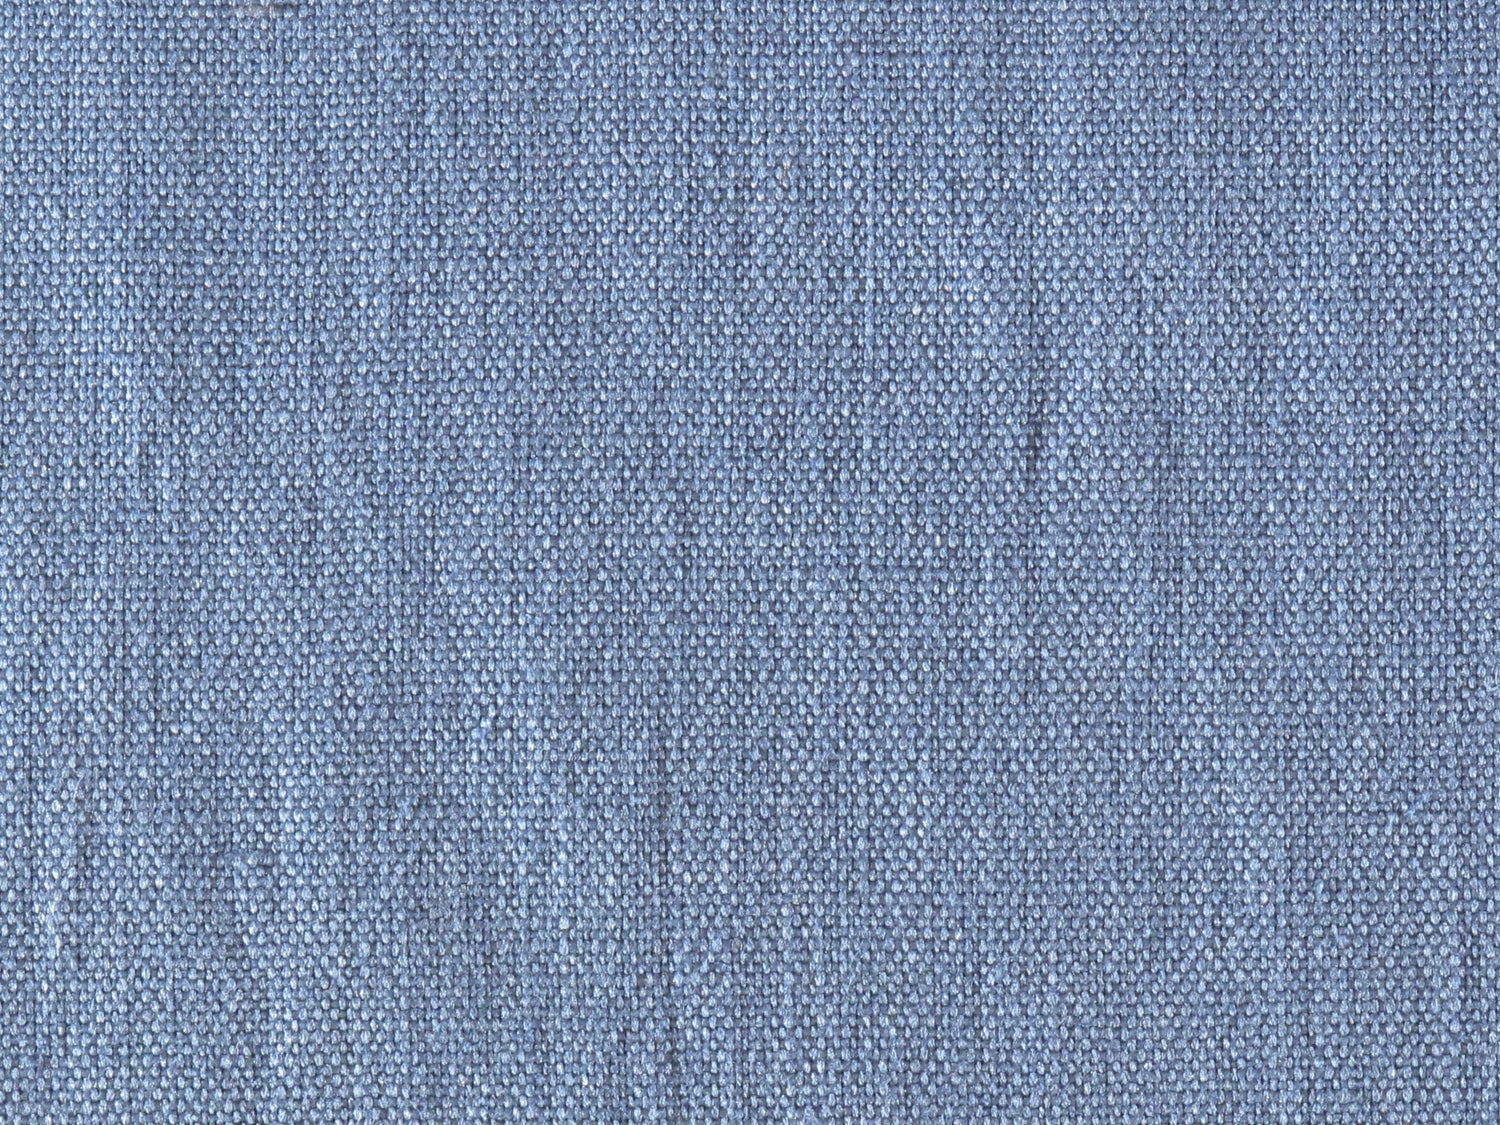 Lakeside Linen fabric in copen color - pattern number PK 0005LAKE - by Scalamandre in the Old World Weavers collection